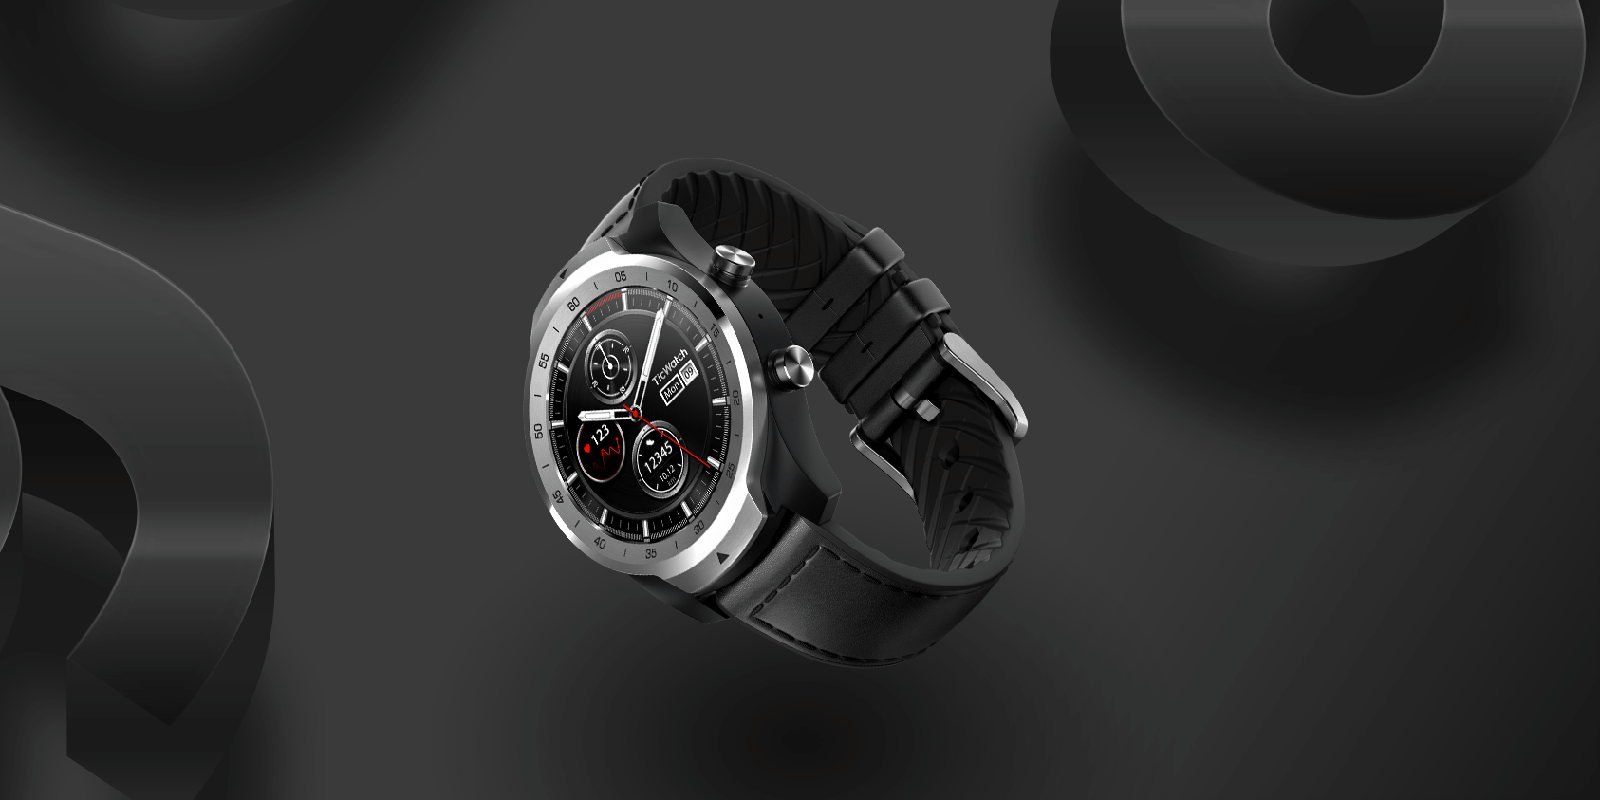 Mobvoi's TicWatch Pro adds a low-power secondary display to the Wear OS ...